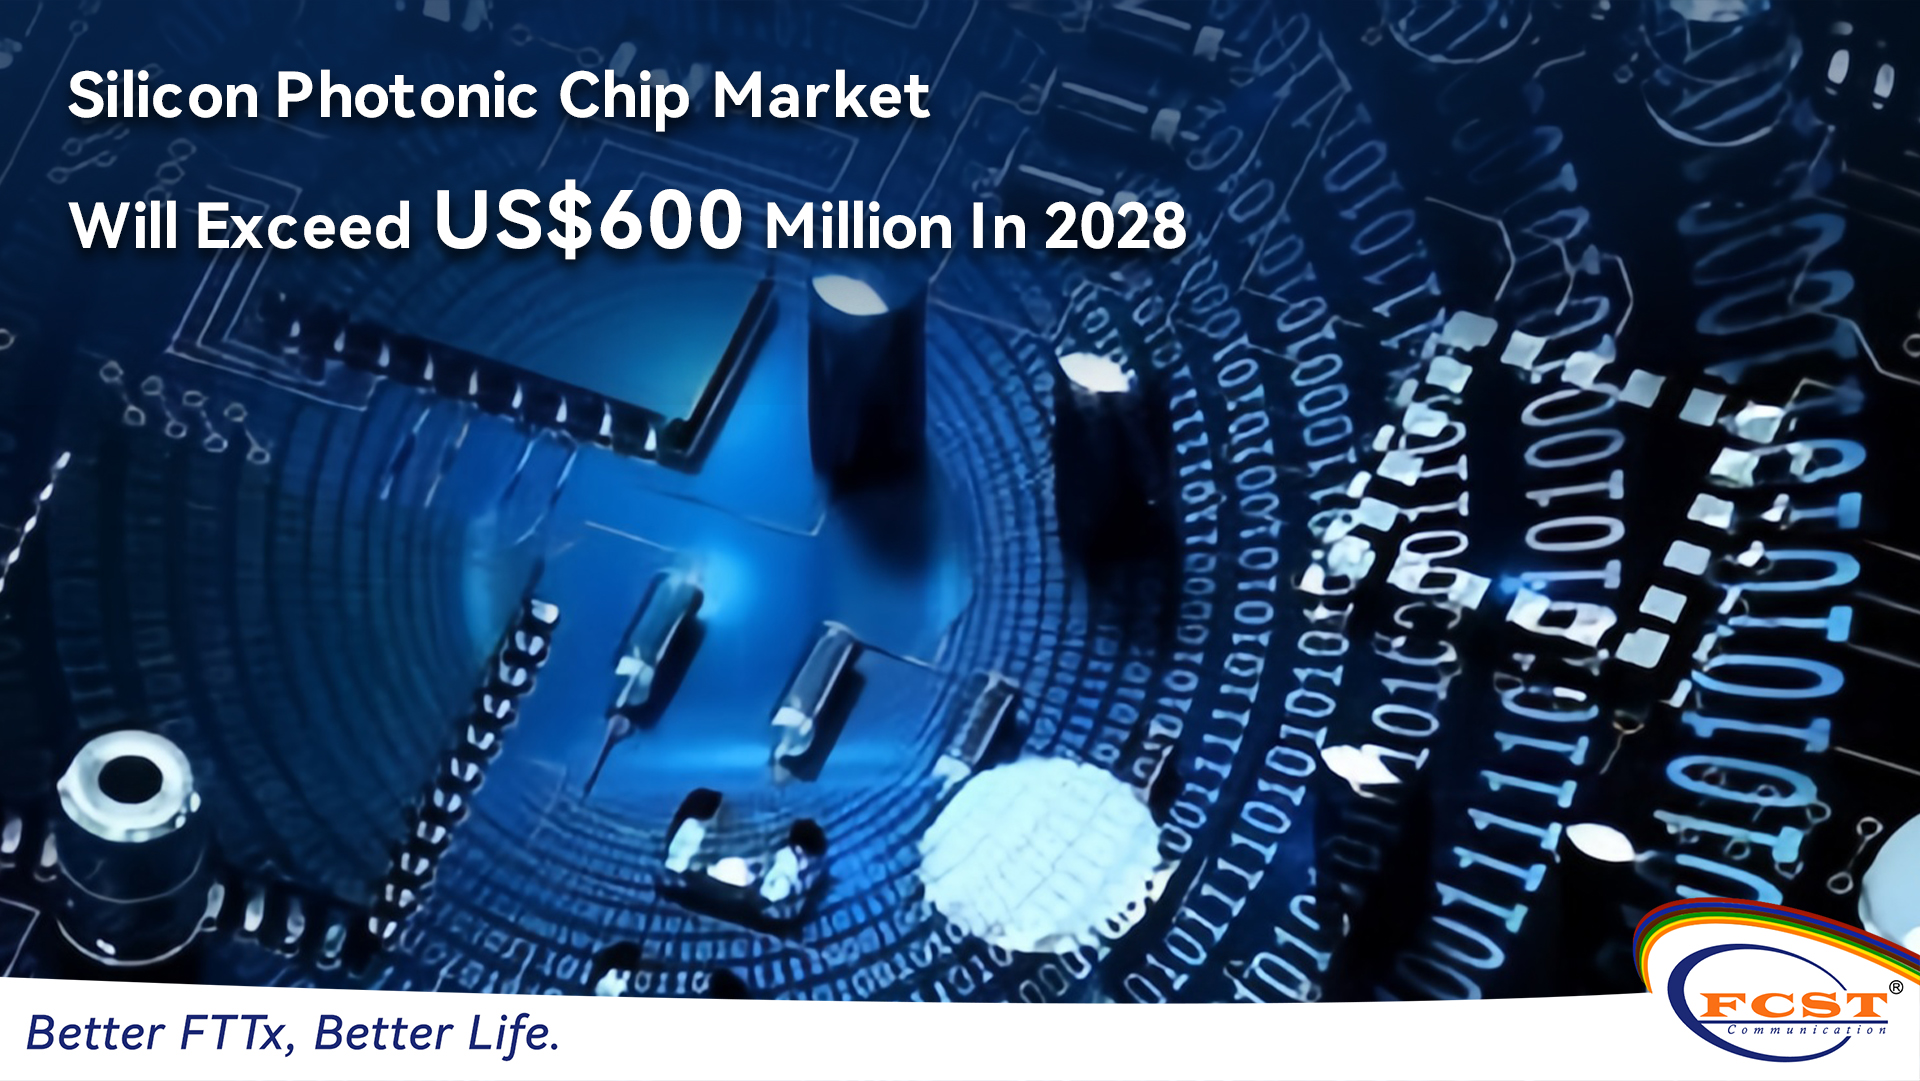 Silicon Photonic Chip Market Will Exceed US$600 Million In 2028